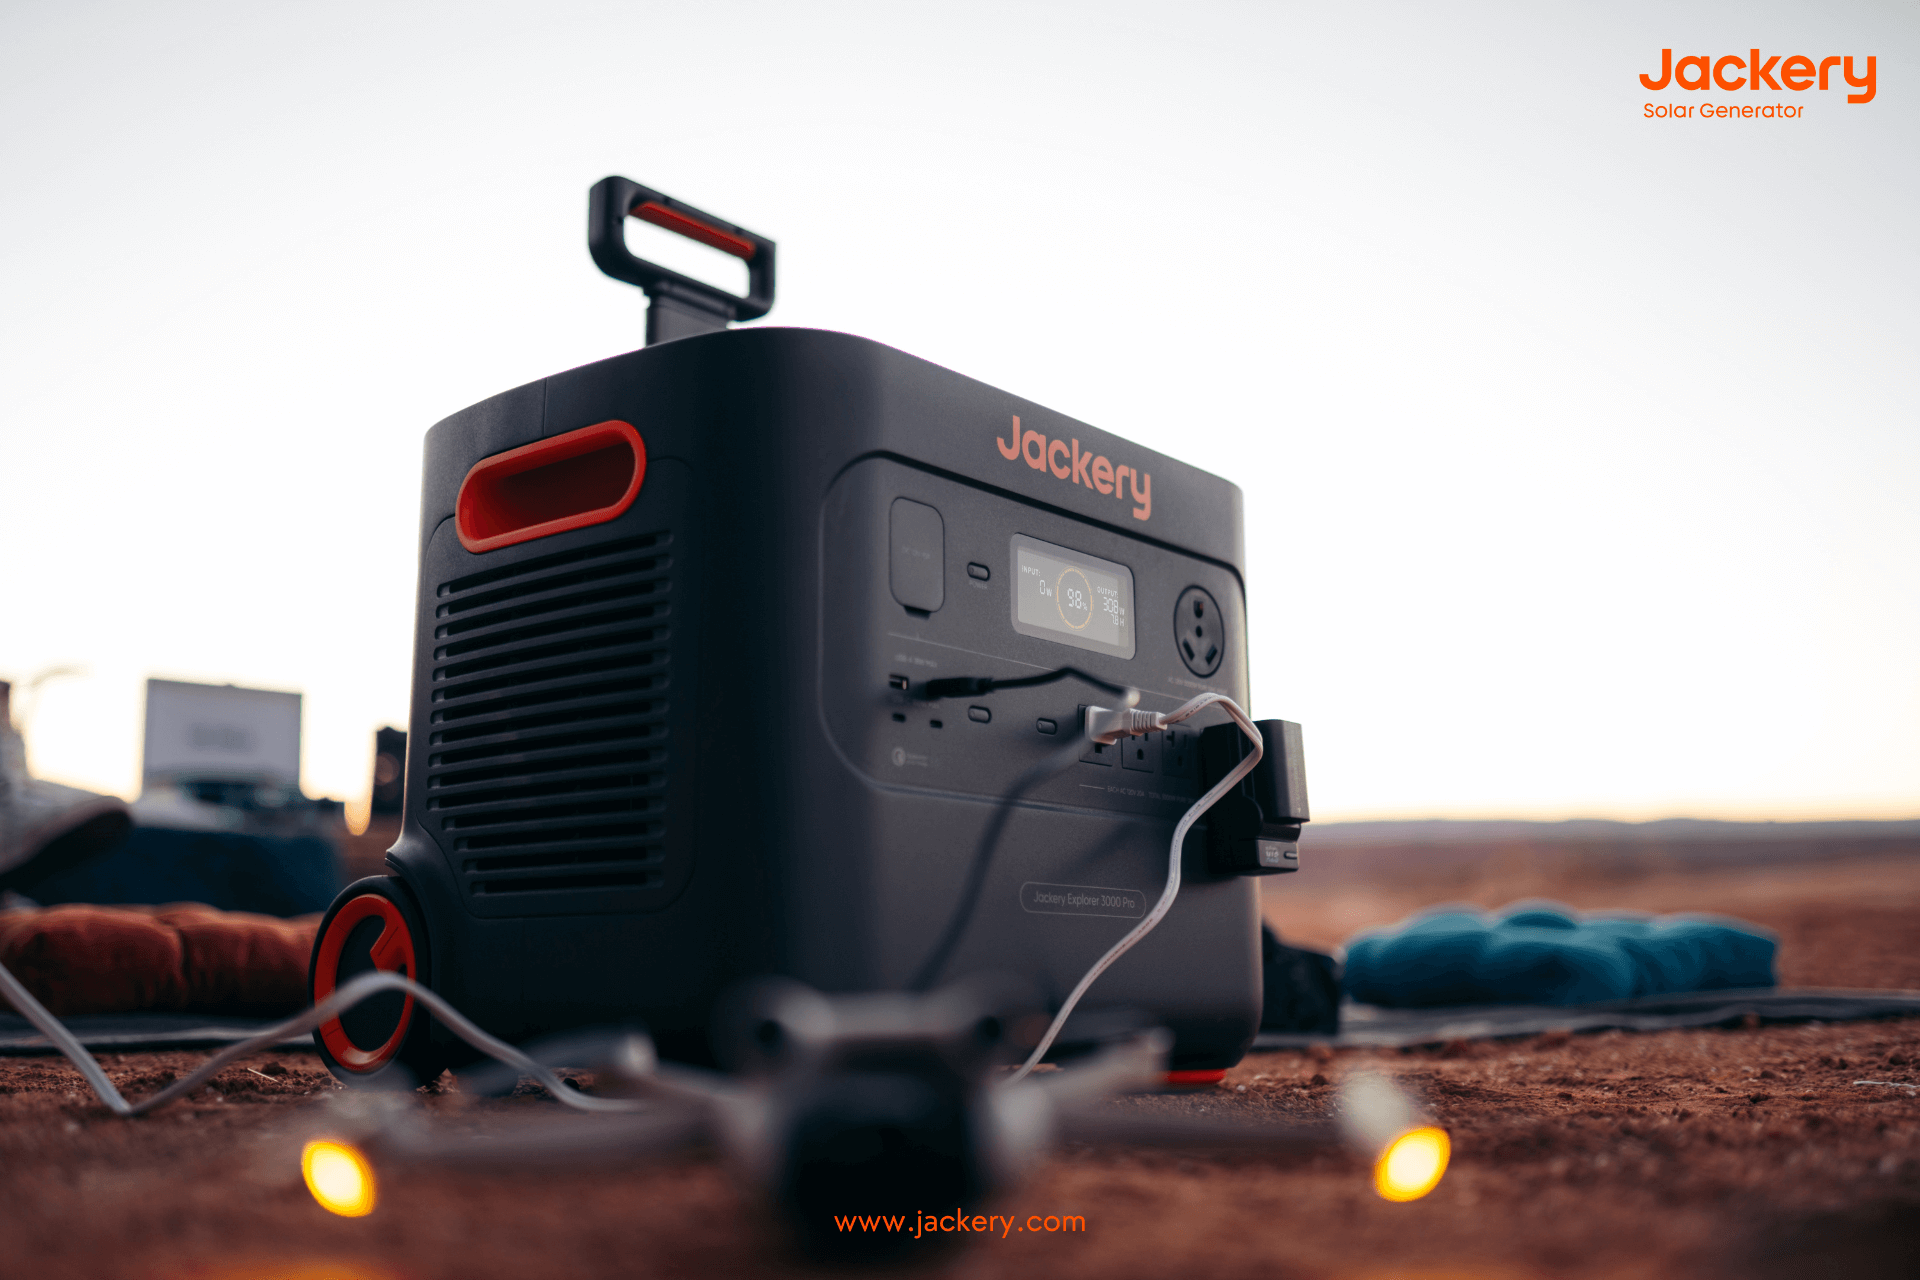 Has the Jackery Explorer 2000 Pro Generator for 37% Off